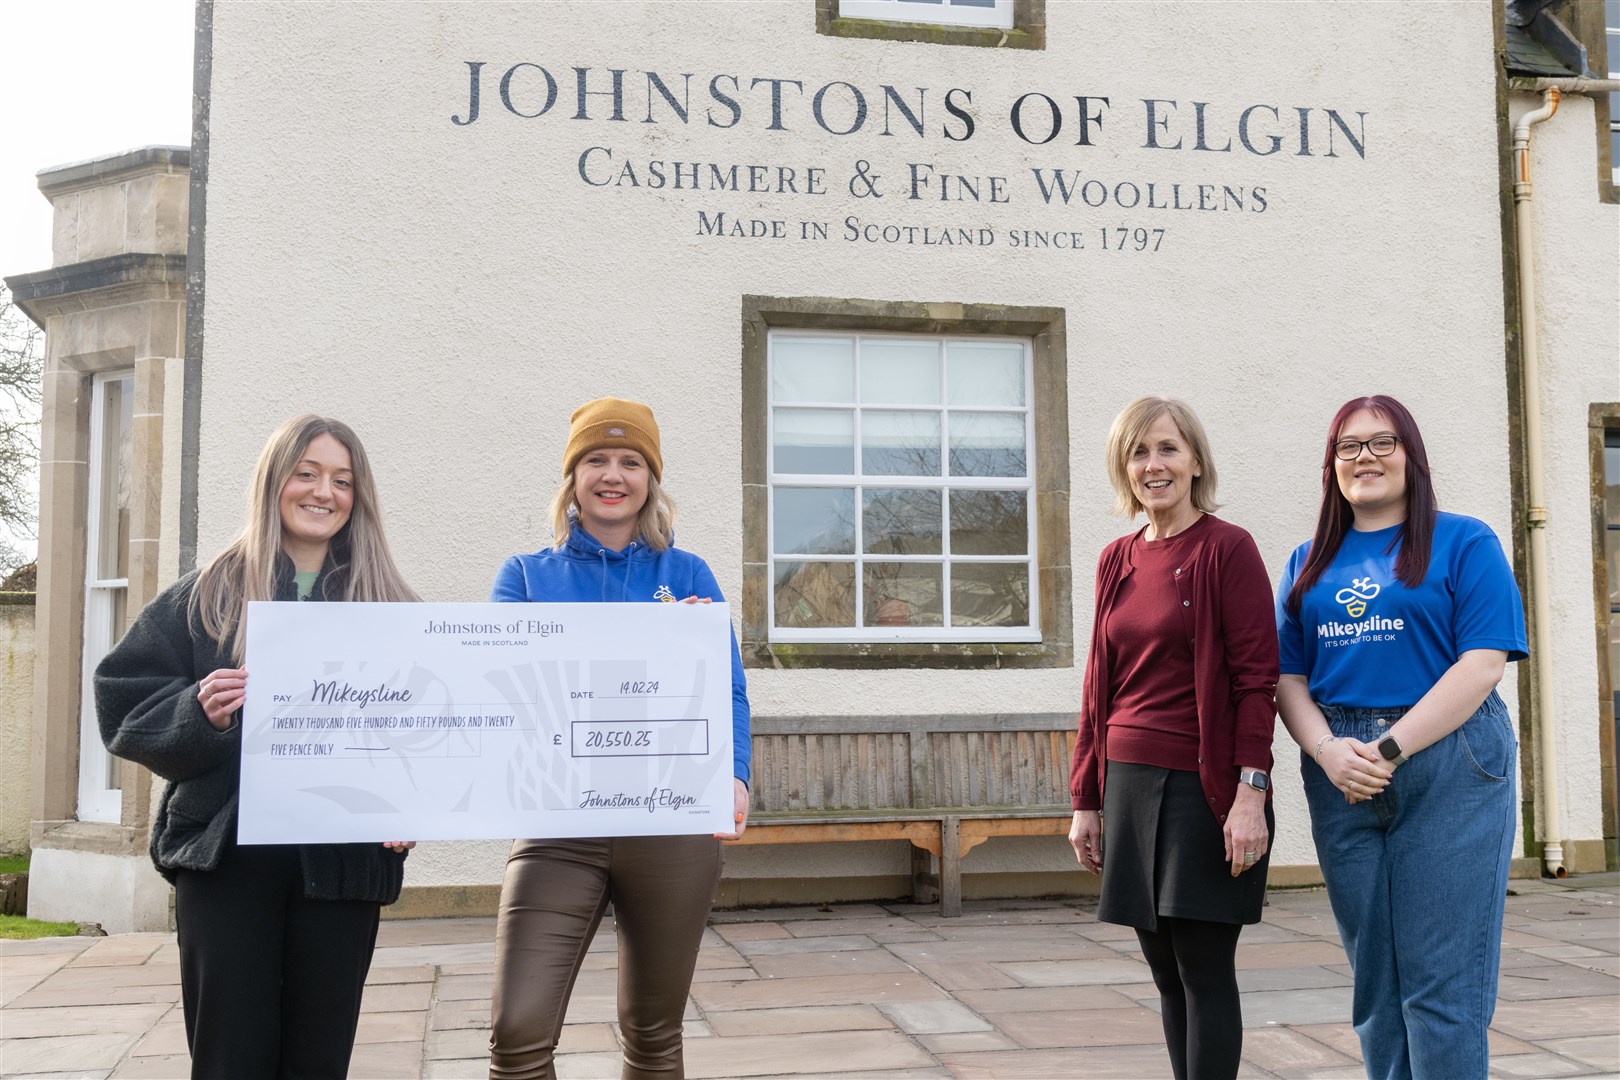 From left: Darcie Stevenson (User Experience Coordinator) with Allana Stables (Bee the Change Manager) and Julia McGlashan (People Director) with Chloe O'Connor (Fundraising and Events Coordinator). ..Johnstons of Elgin Charity Fundraising hands over a cheque for Â£20,550.25 to Mikeysline. ..Picture: Beth Taylor.